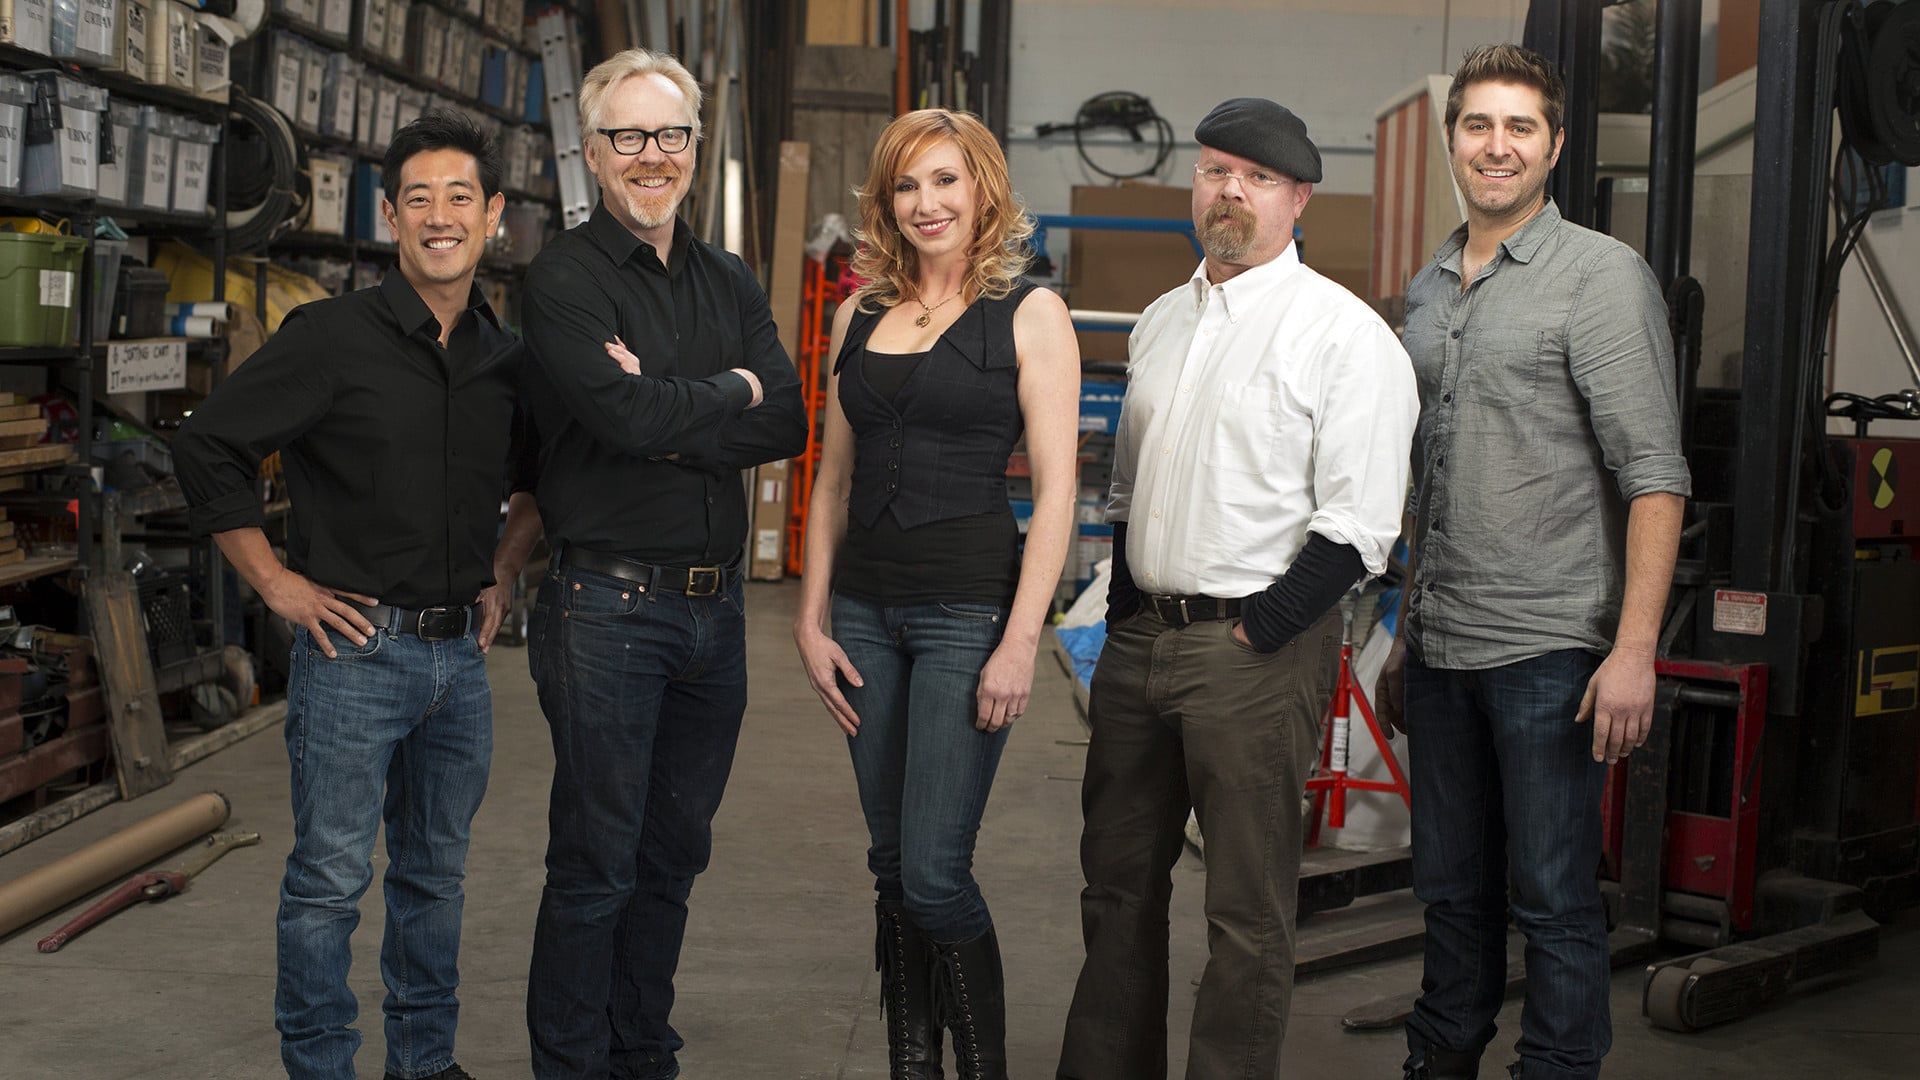 mythbusters HD wallpaper, background